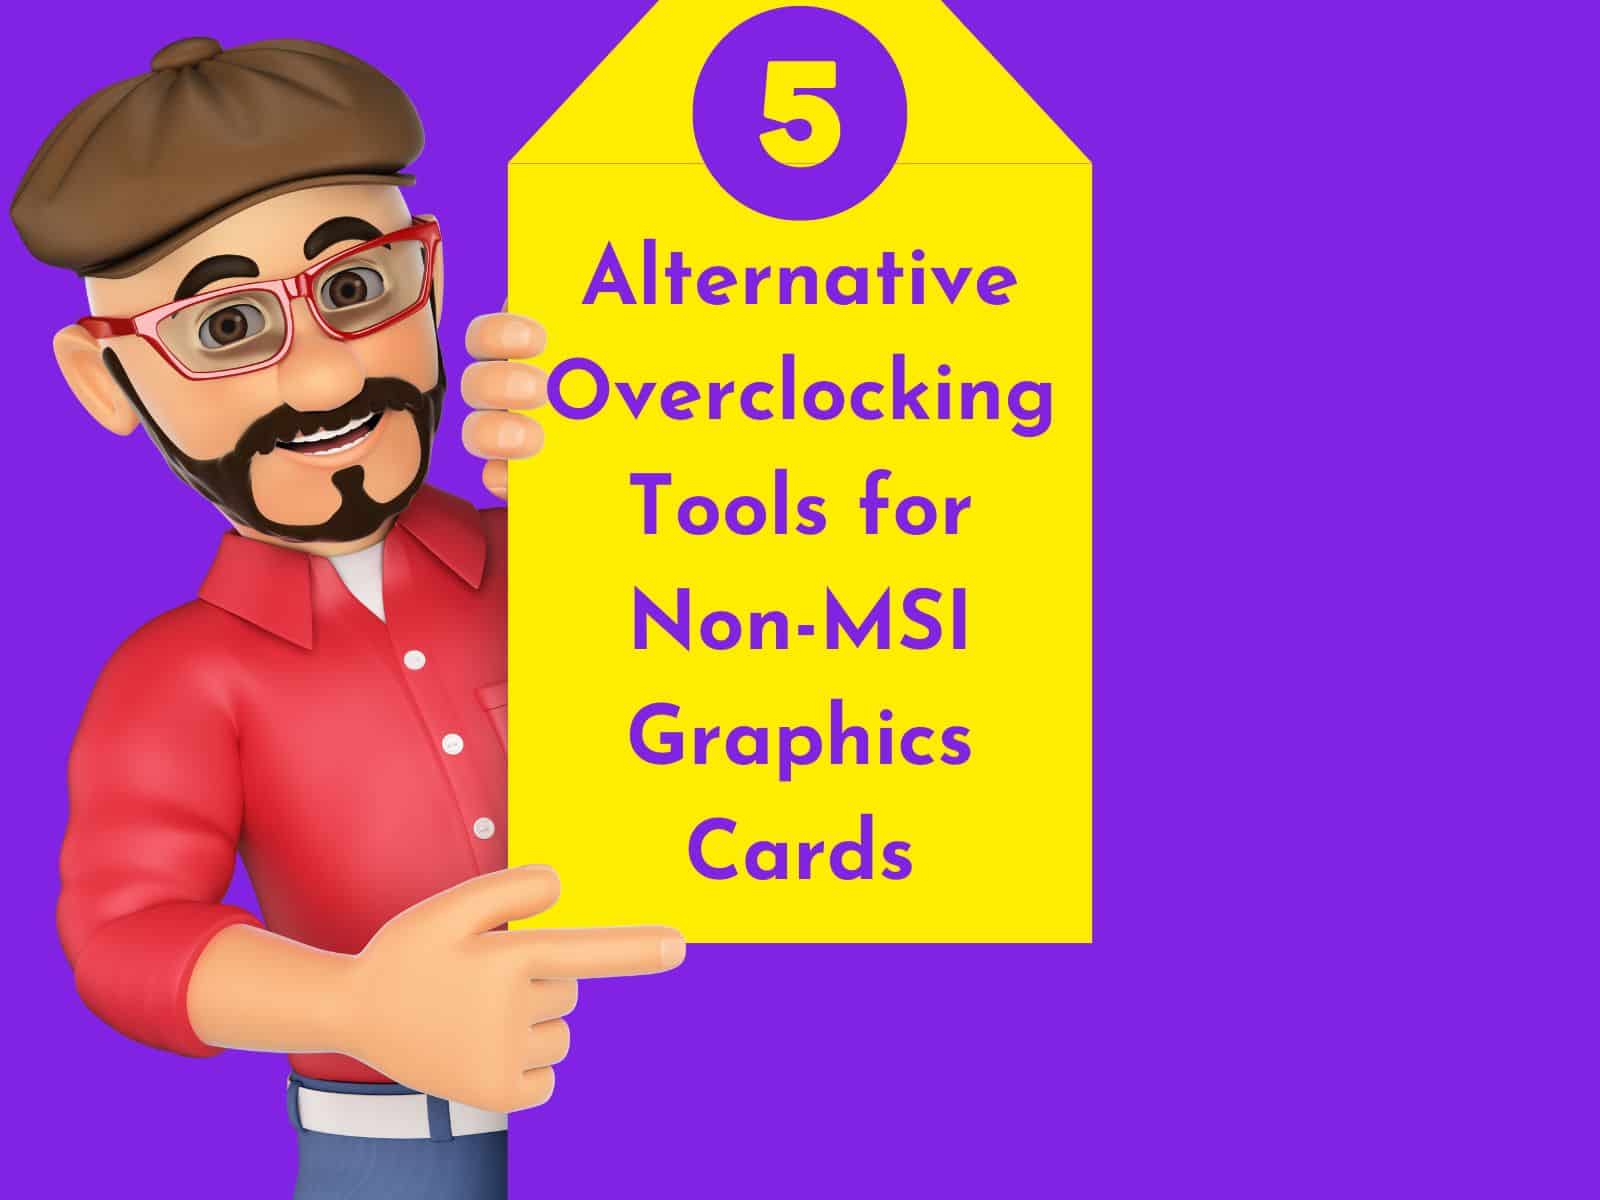 C:\Users\Mohsin\Downloads\5 Alternative Overclocking Tools for Non-MSI Graphics Cards.jpg